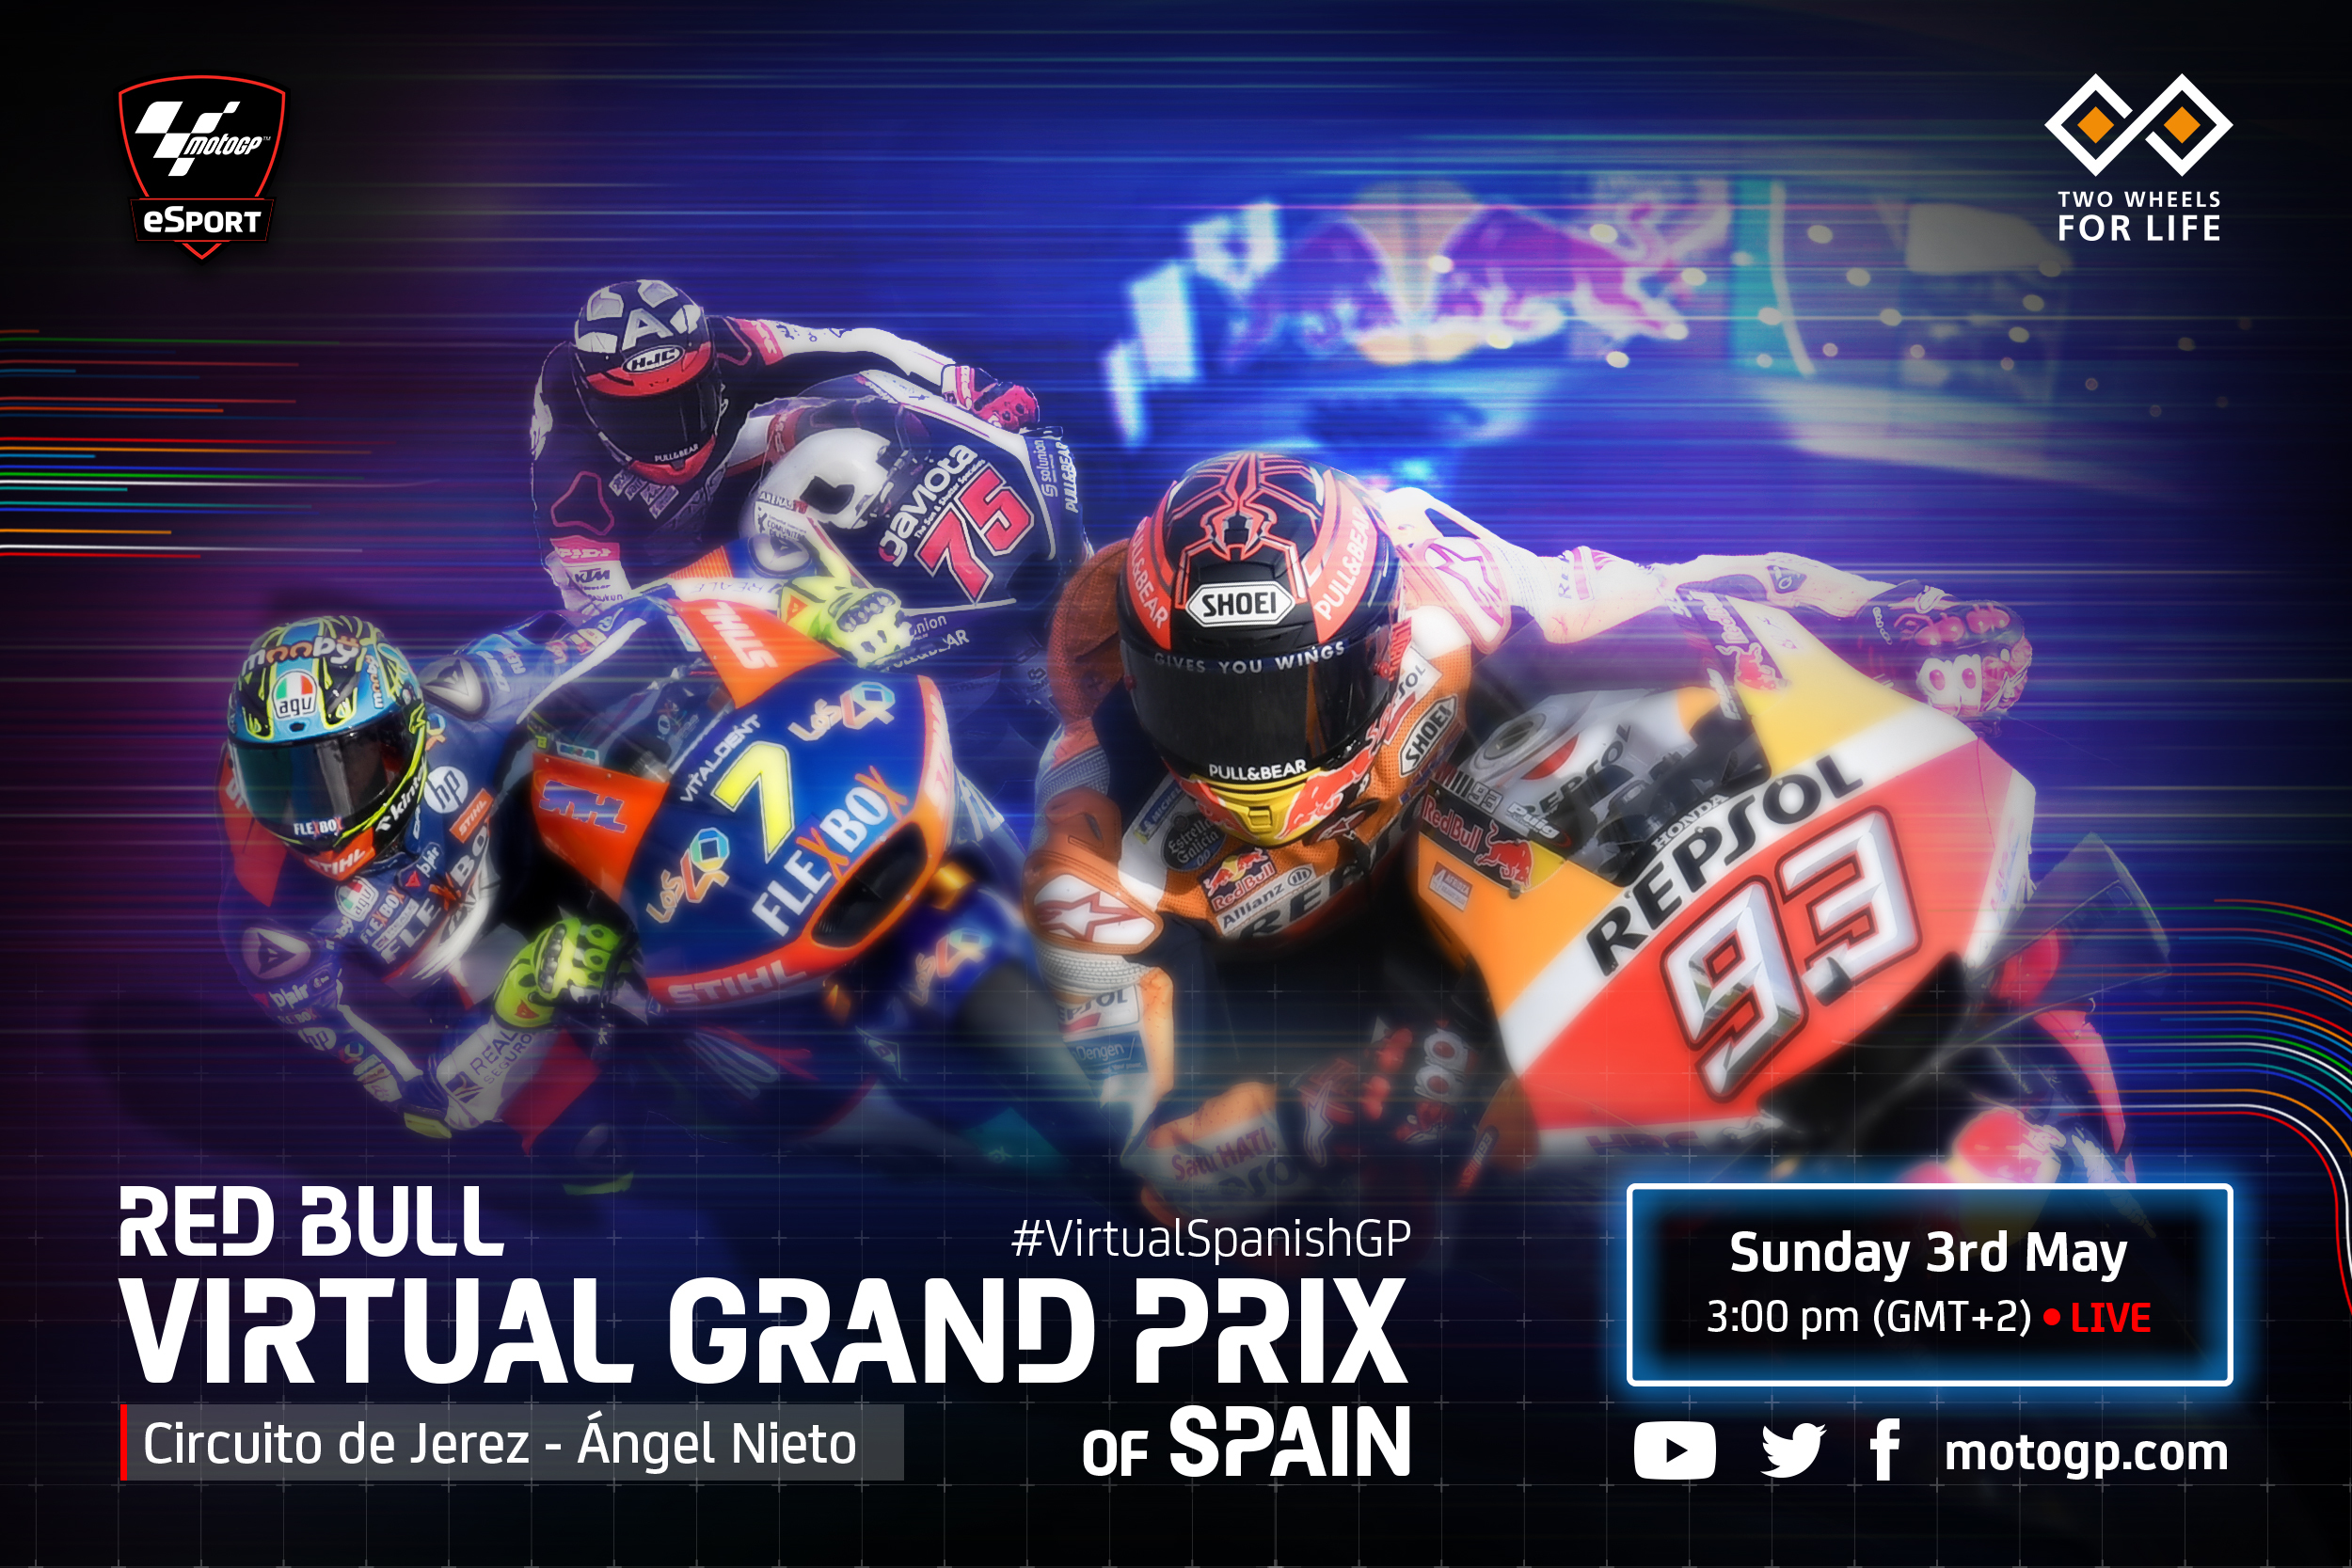 Dorna Sports To Host First Ever Red Bull Virtual Grand Prix of Spain